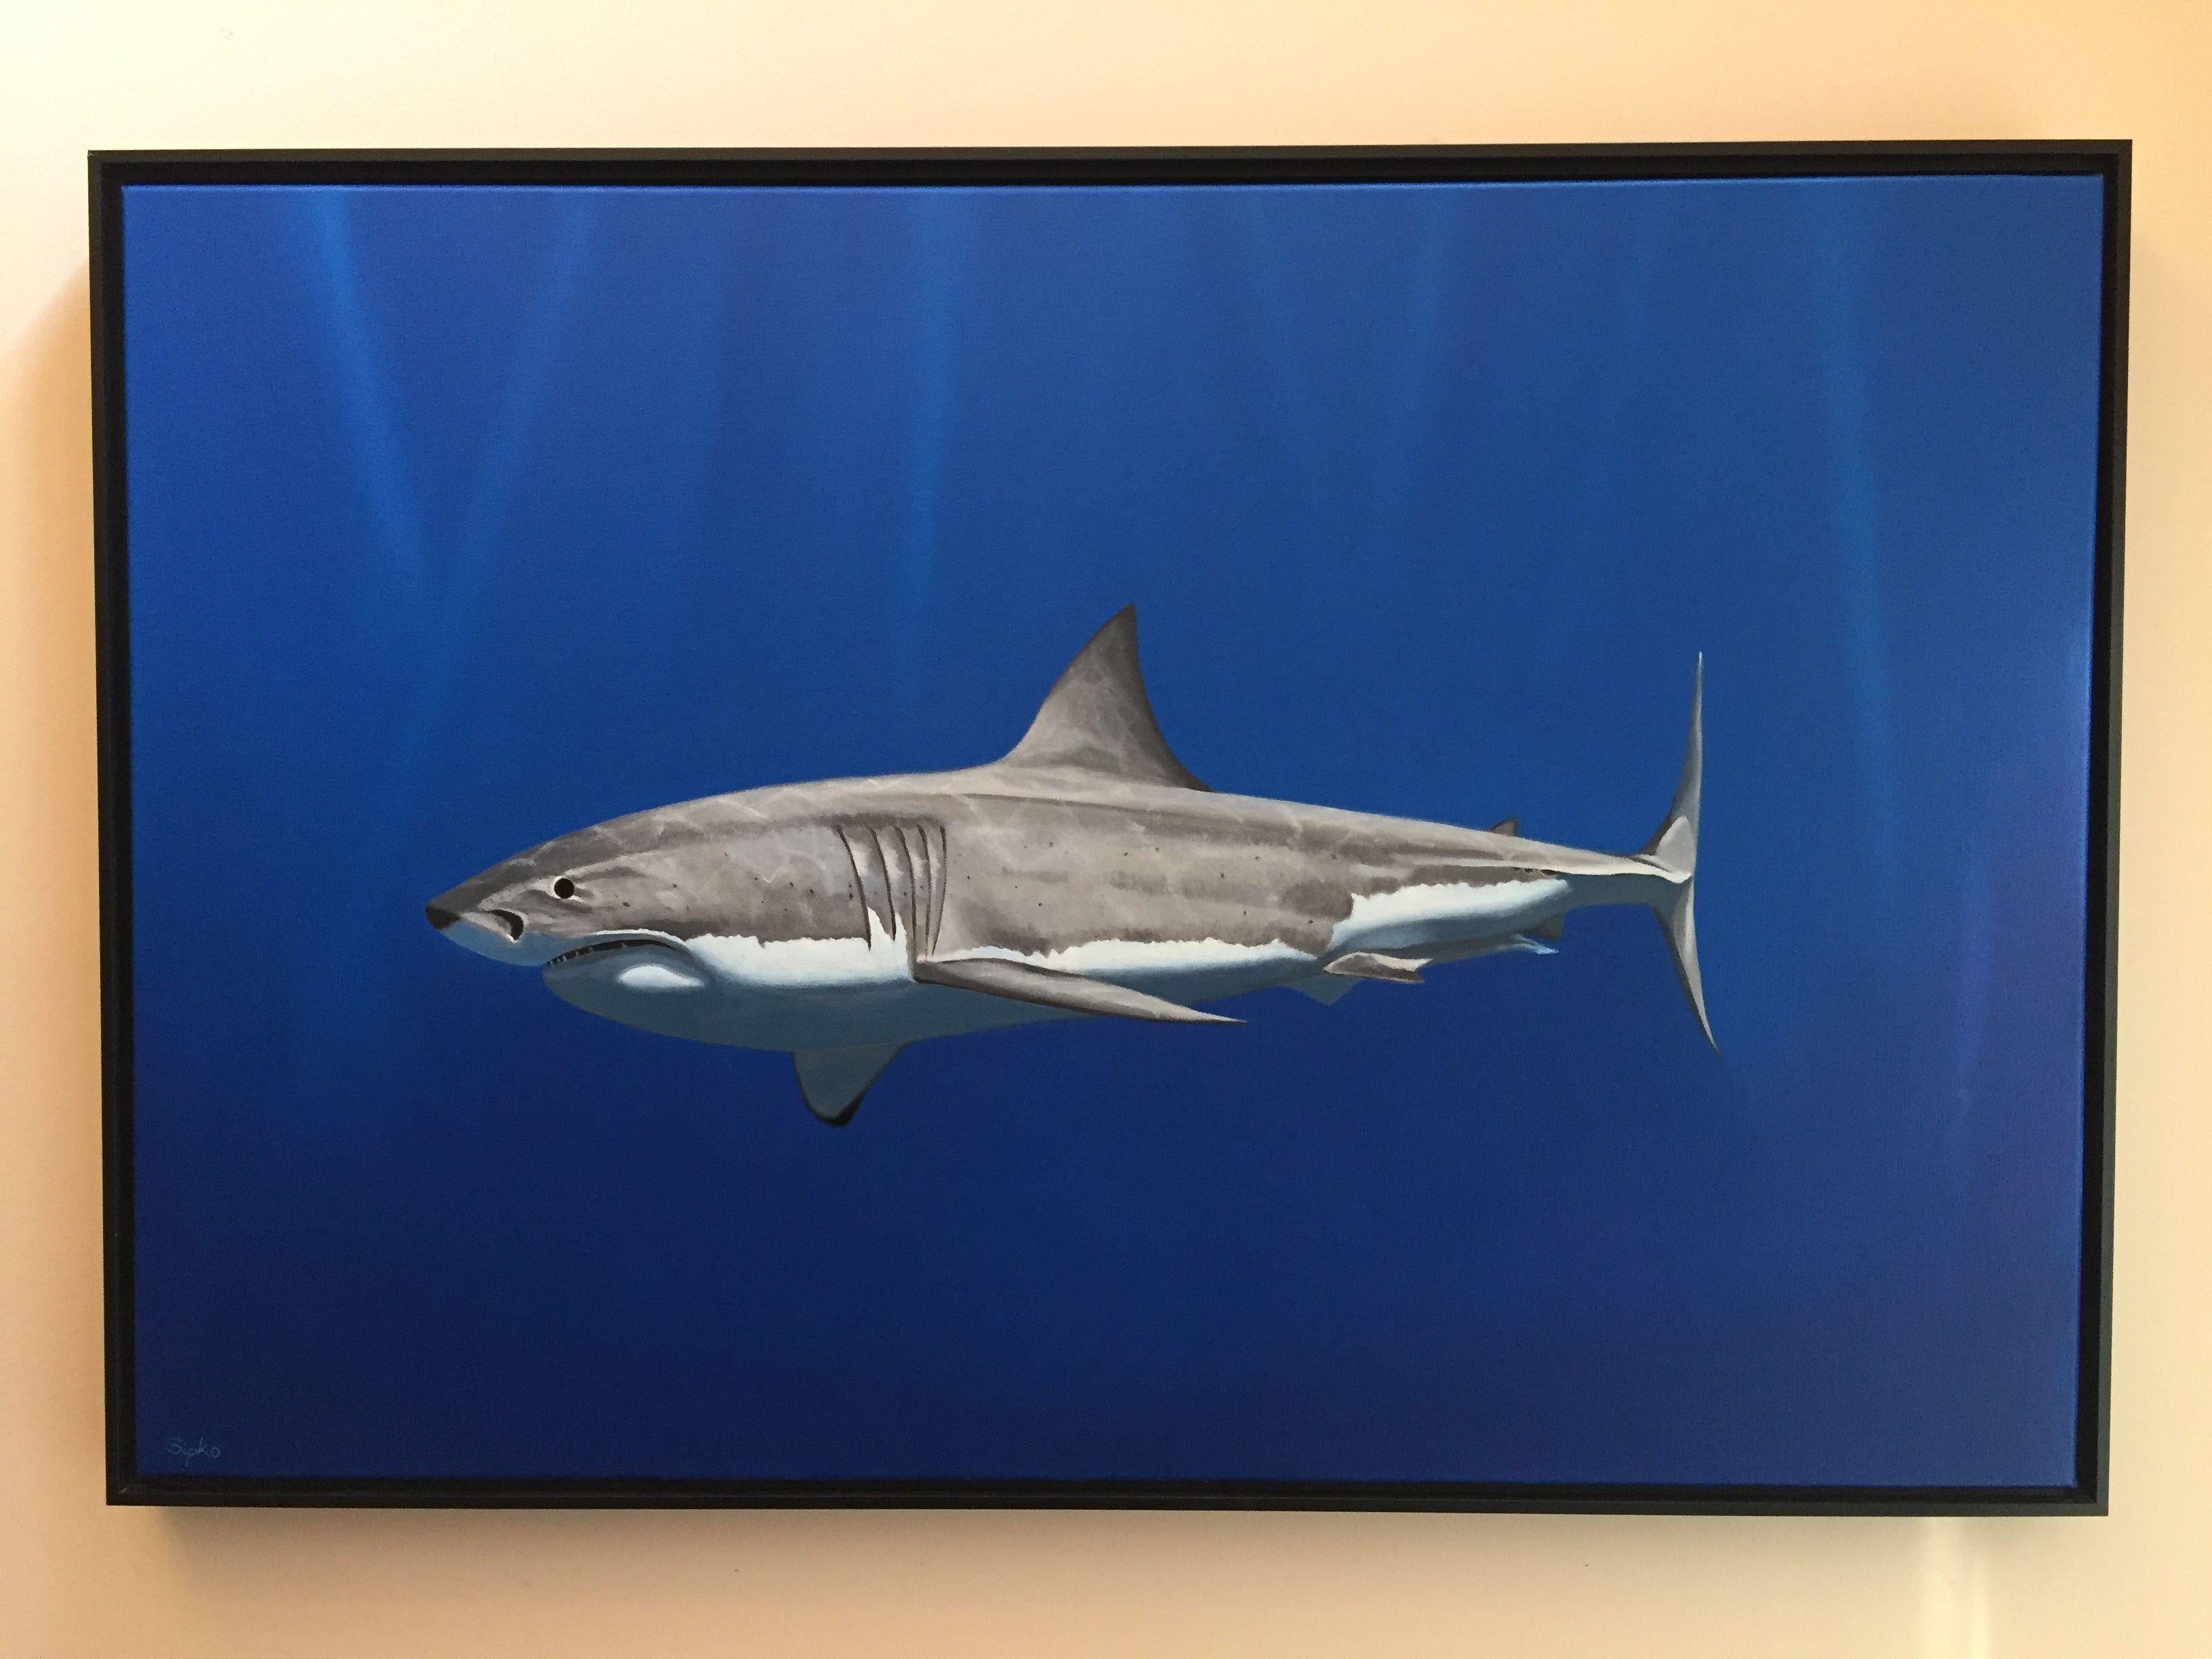 I enjoy spending my summers in Cape Cod and these amazing sharks have become the talk of the town over the last few years.  They have really changed the dynamic of what it means to go to the beach!  This piece is a large oil on canvas and it is